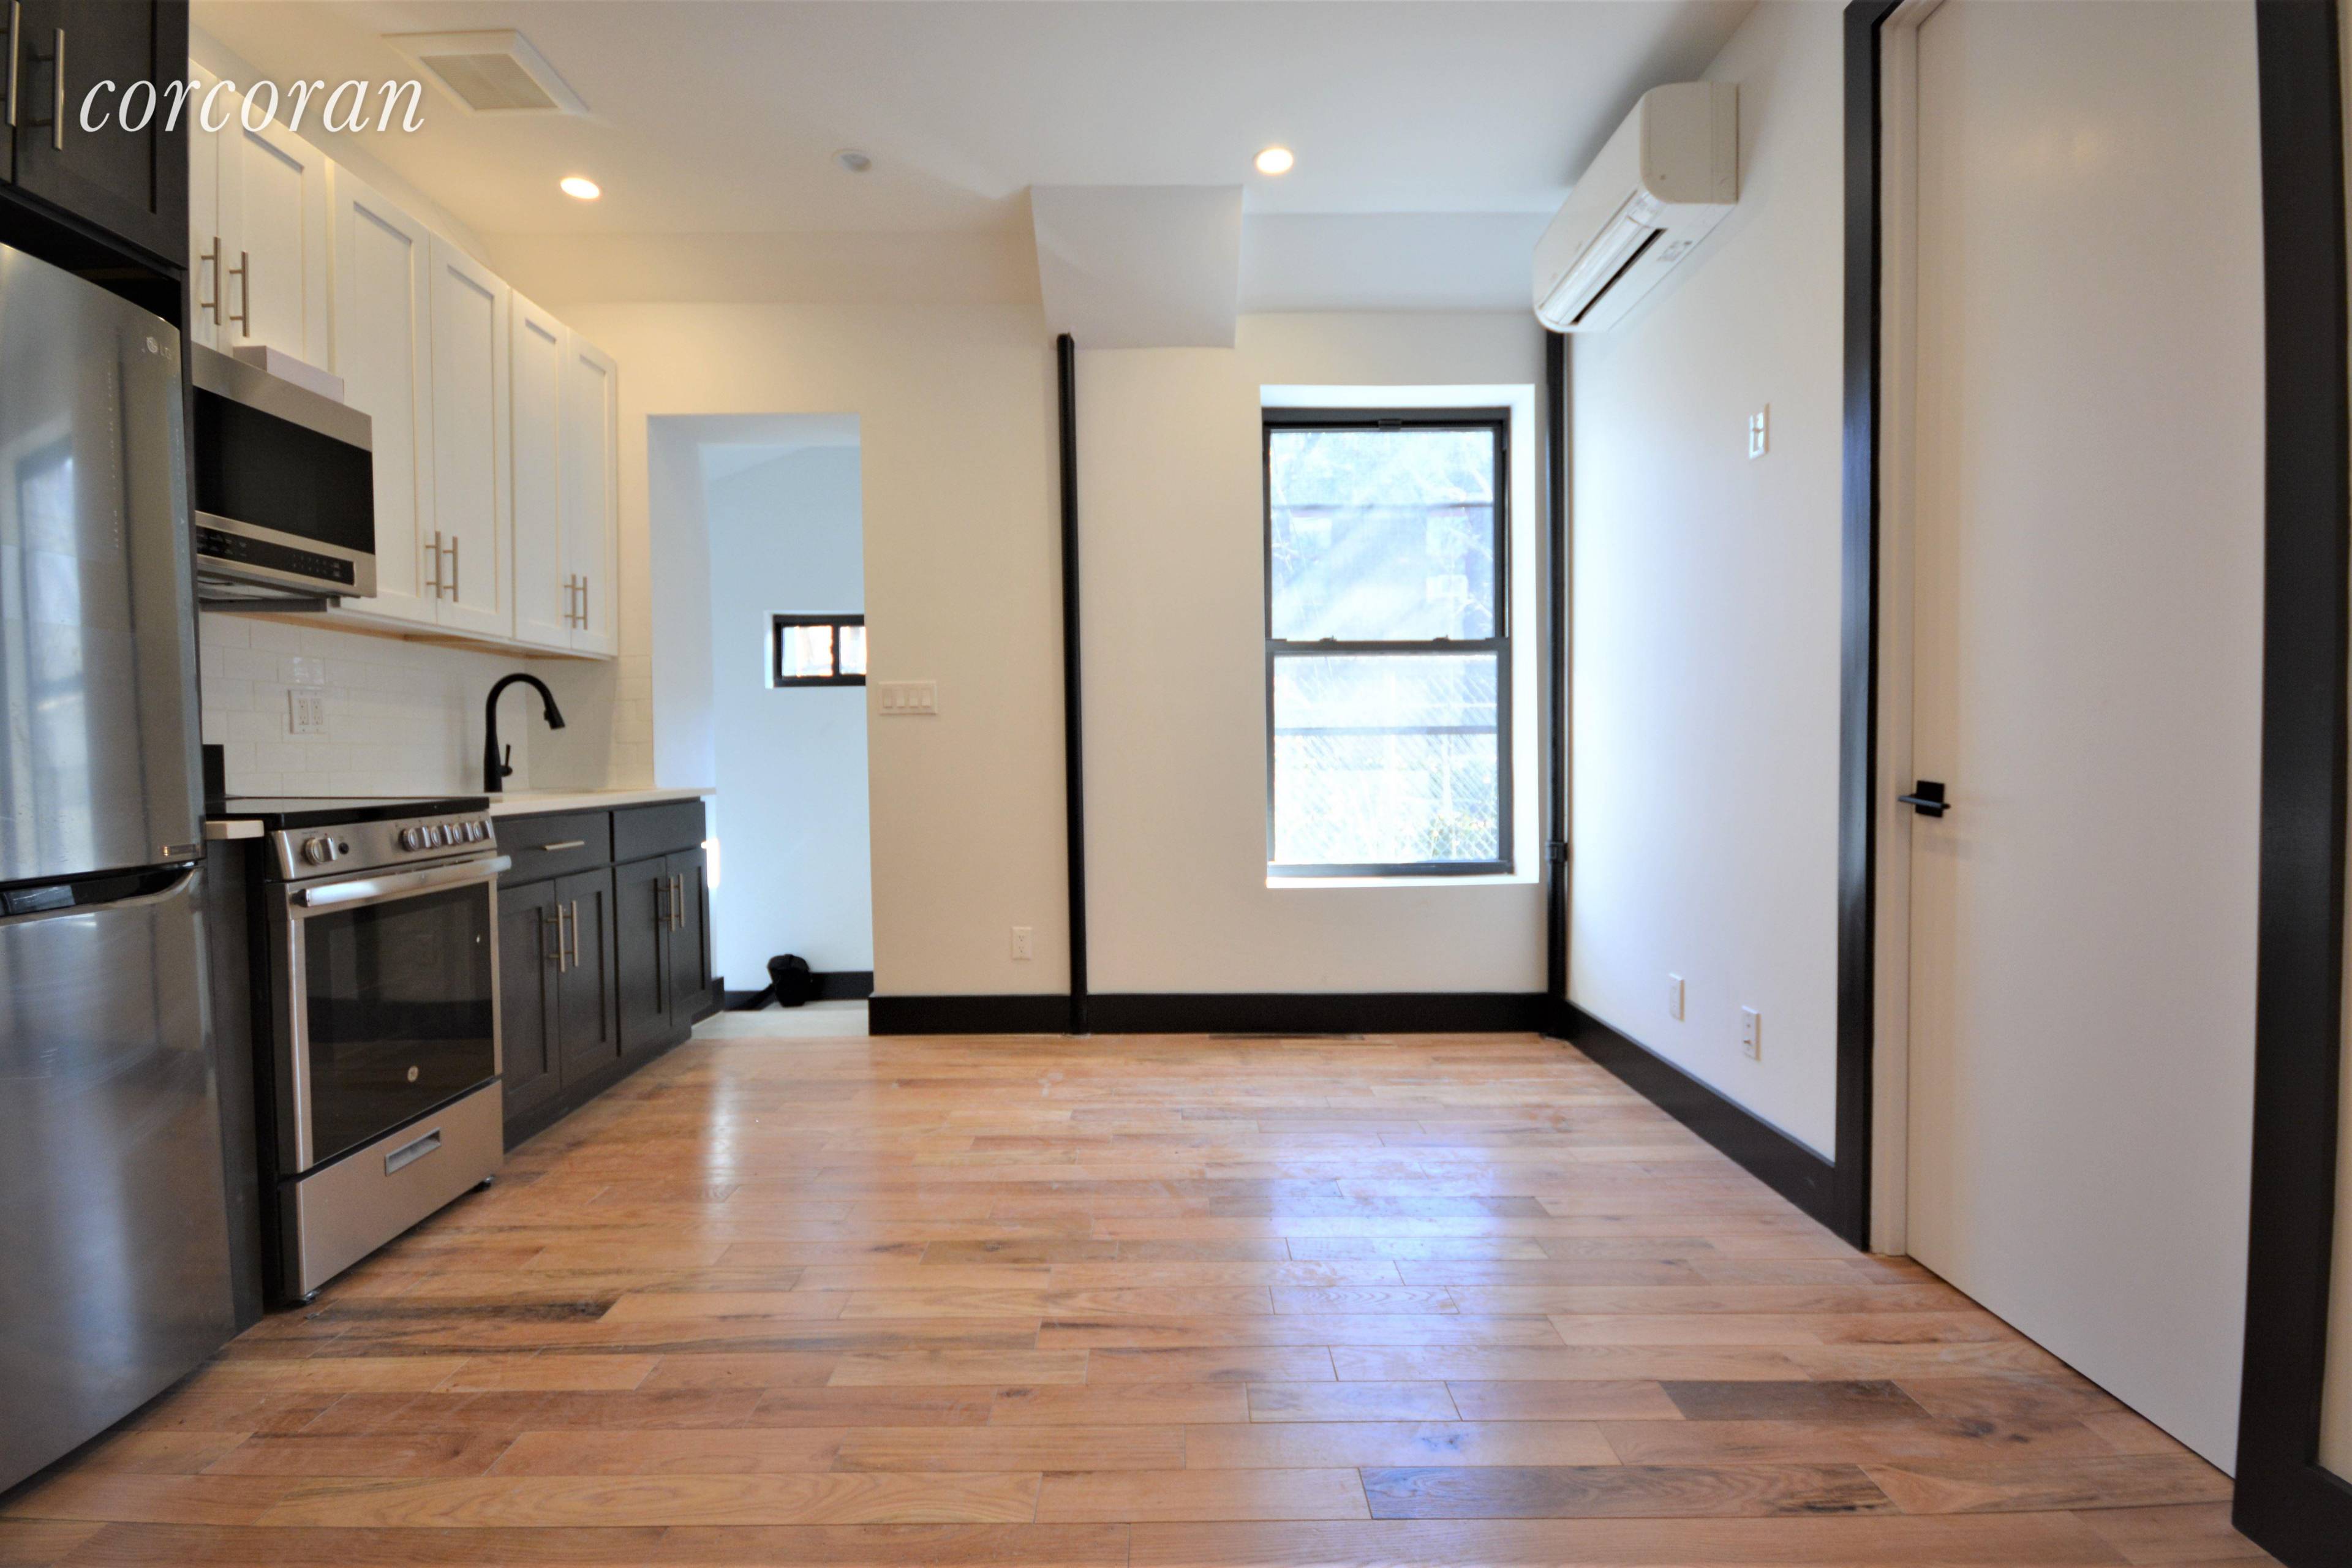 Welcome To Thriving Crown Heights North Beautifully remodeled 2 3 bedroom 2 bathroom Space for 3rd bedroom downstairs with large open floor basement and a surplus of sunlight.